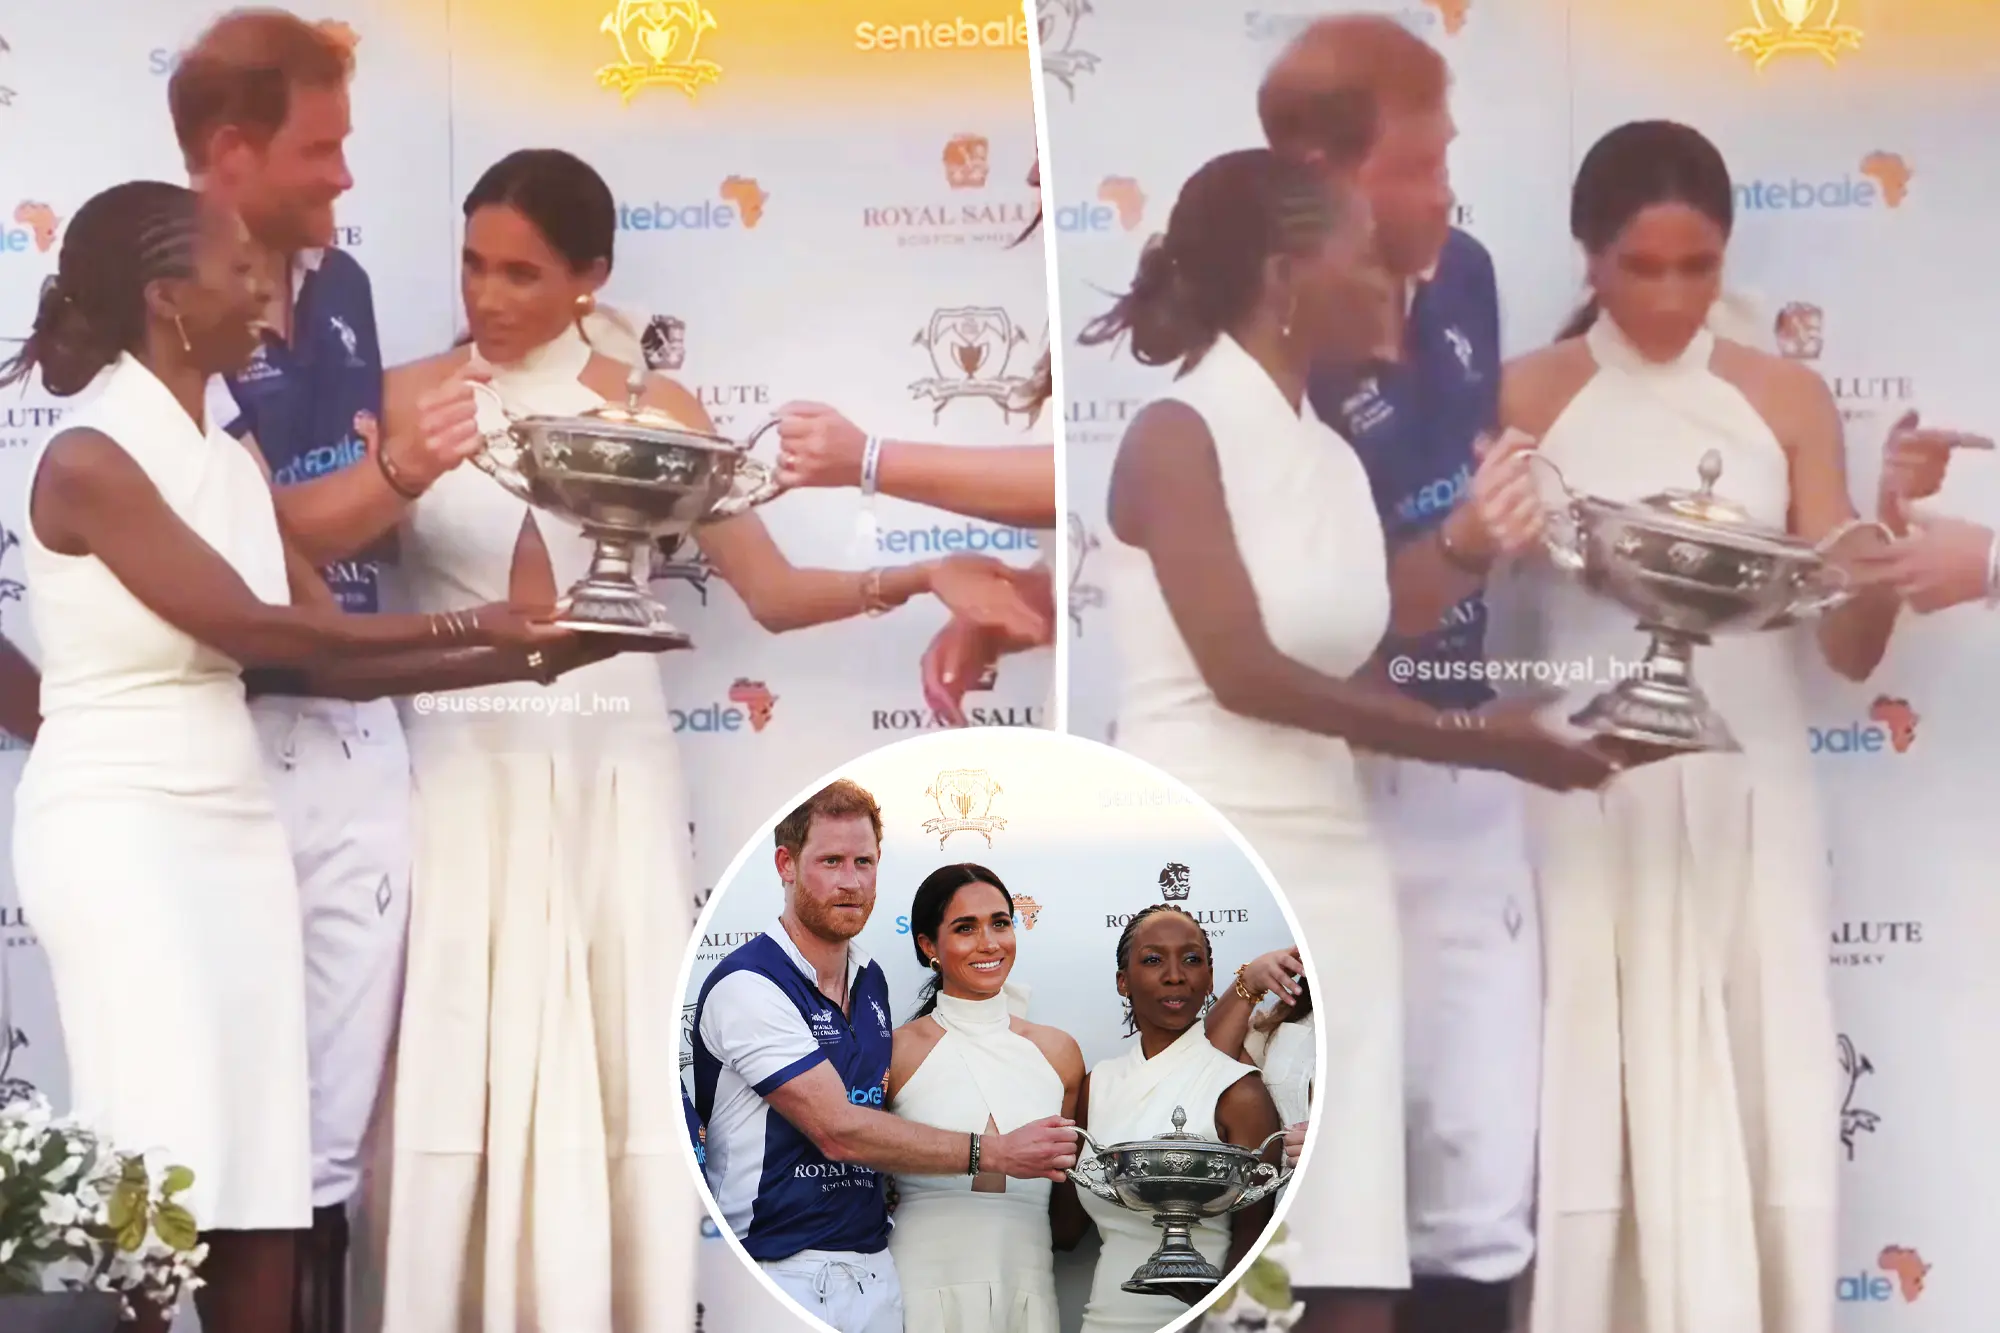 Protecting her territory: Meghan Markle was filmed seemingly refusing to let a woman stand next to Prince Harry for a picture to celebrate his polo team’s recent win.